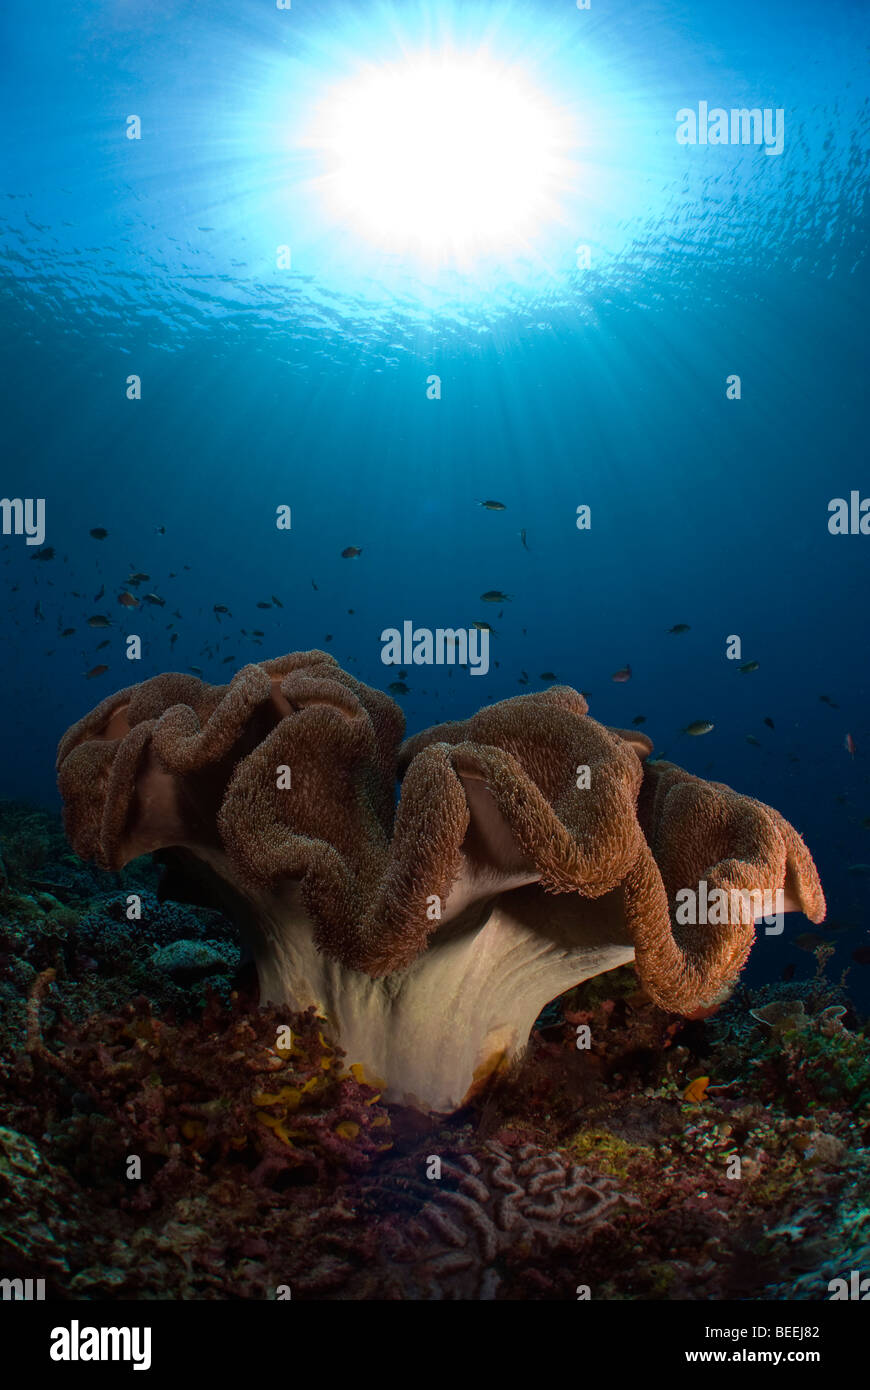 Mushroom Leather Coral under water. Stock Photo